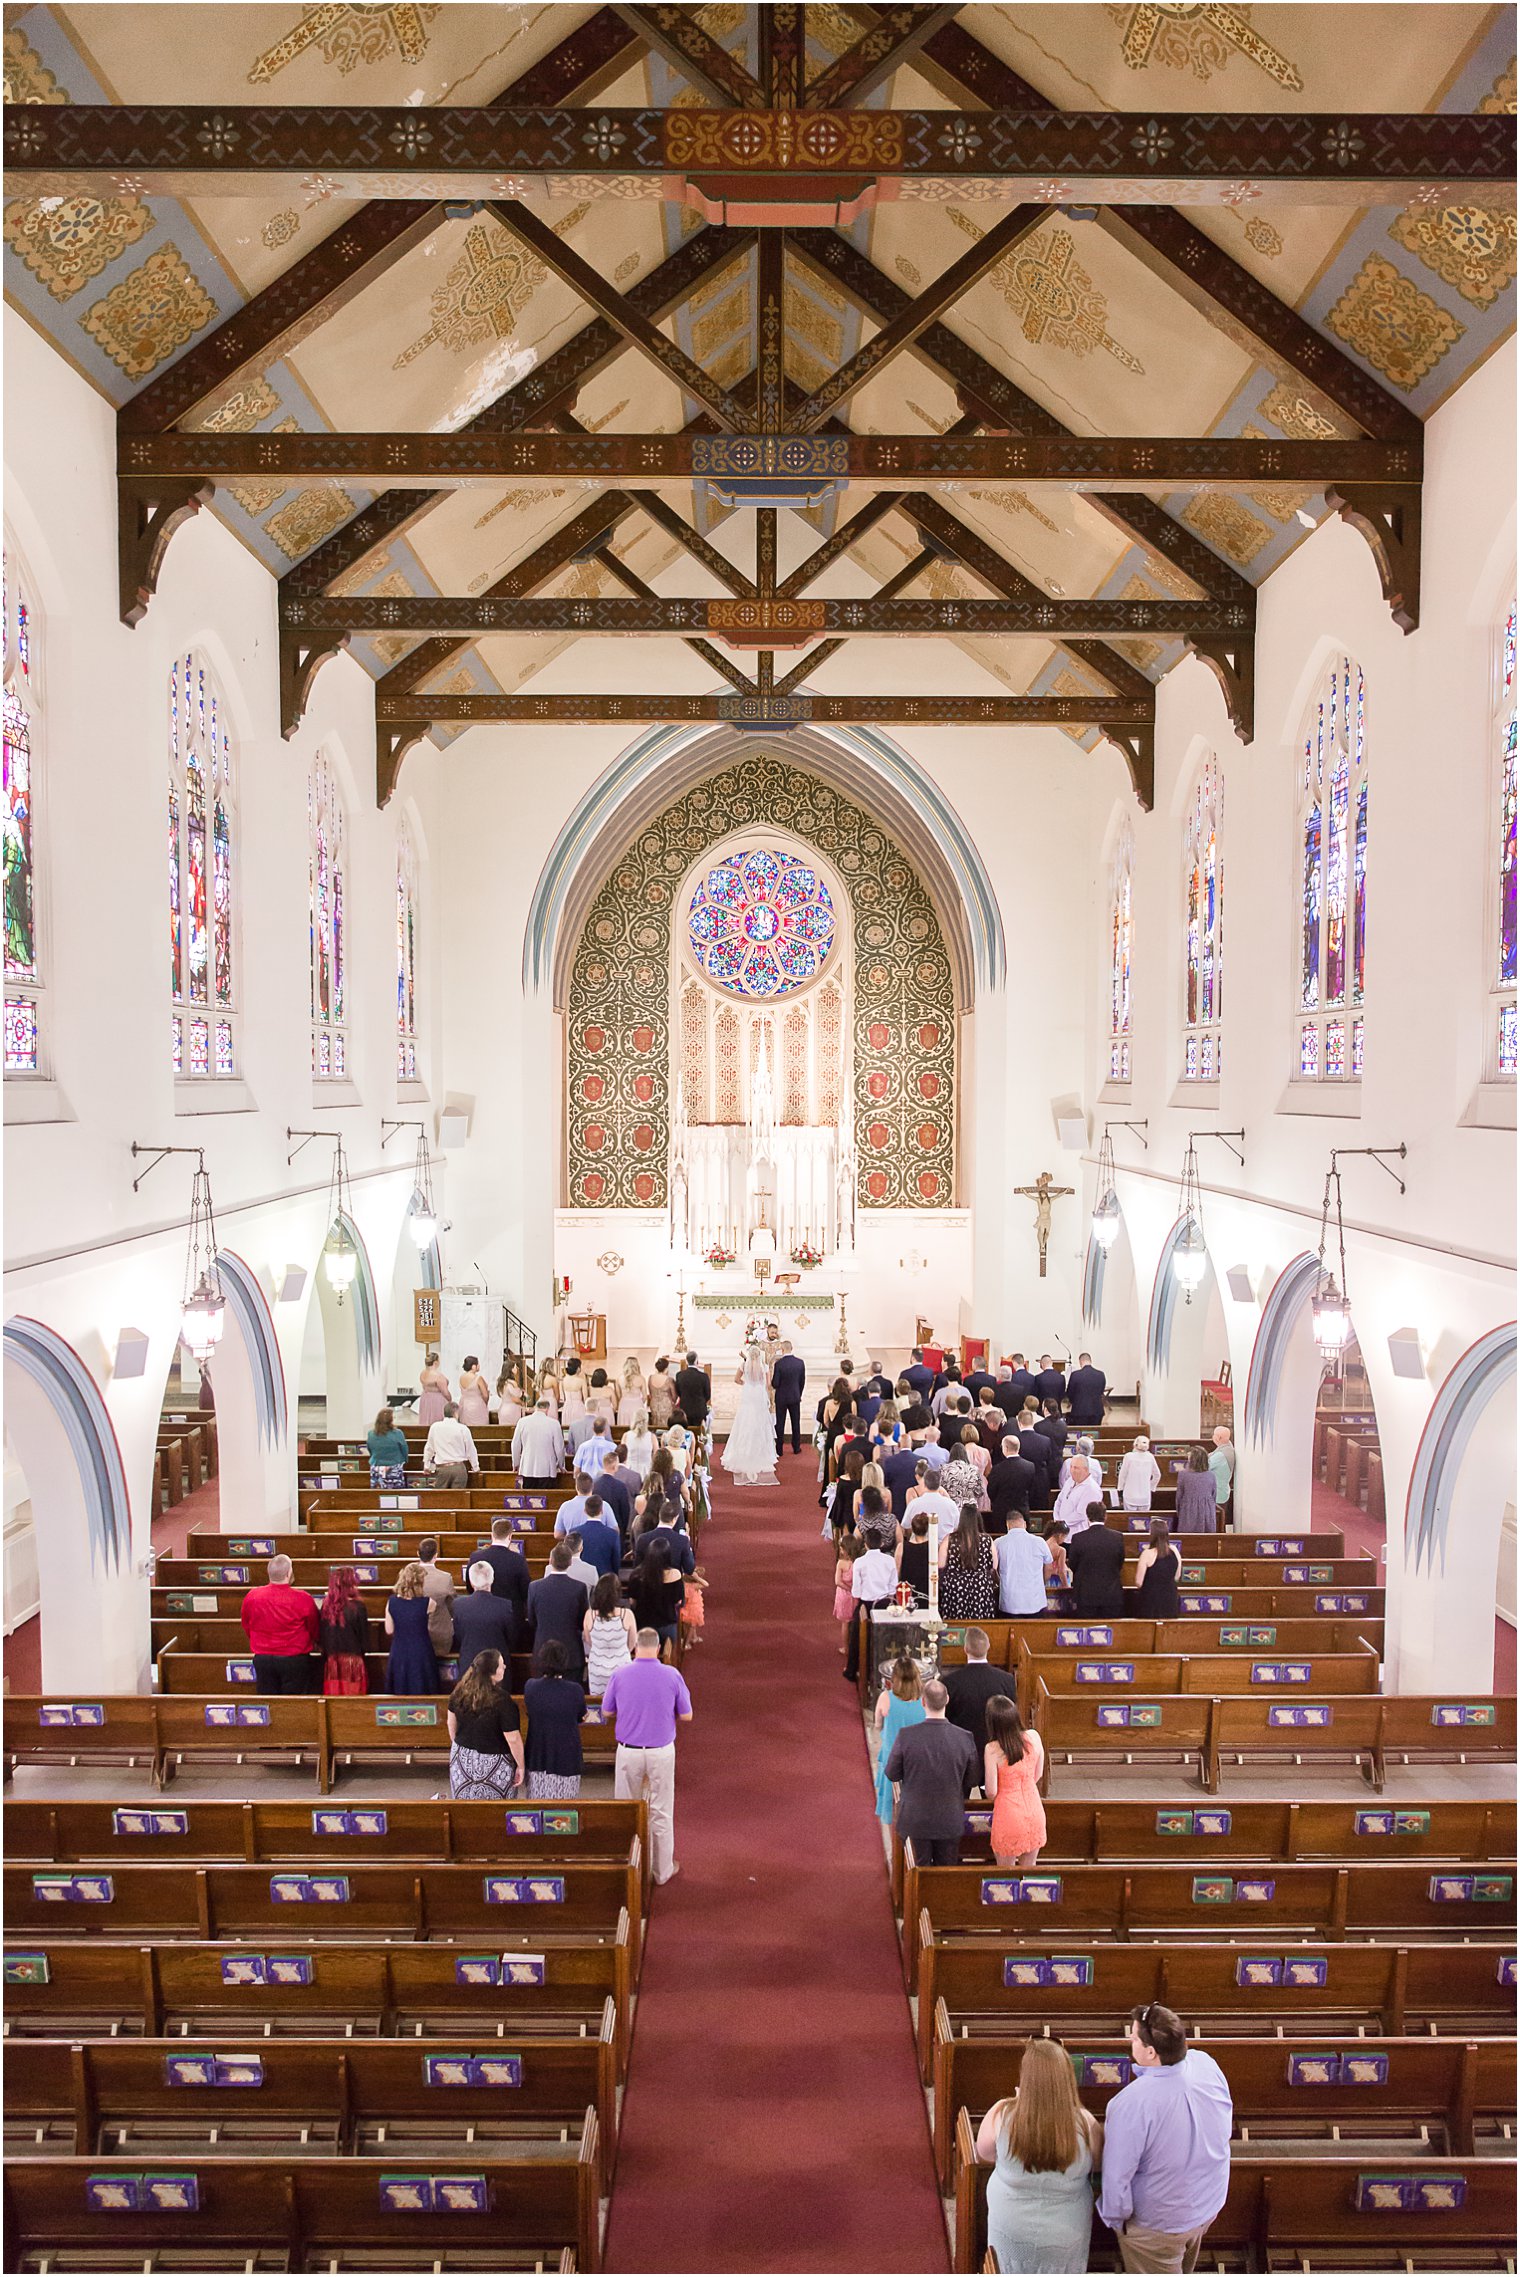 Wedding ceremony at Our Lady Star of the Sea - Long Branch, NJ